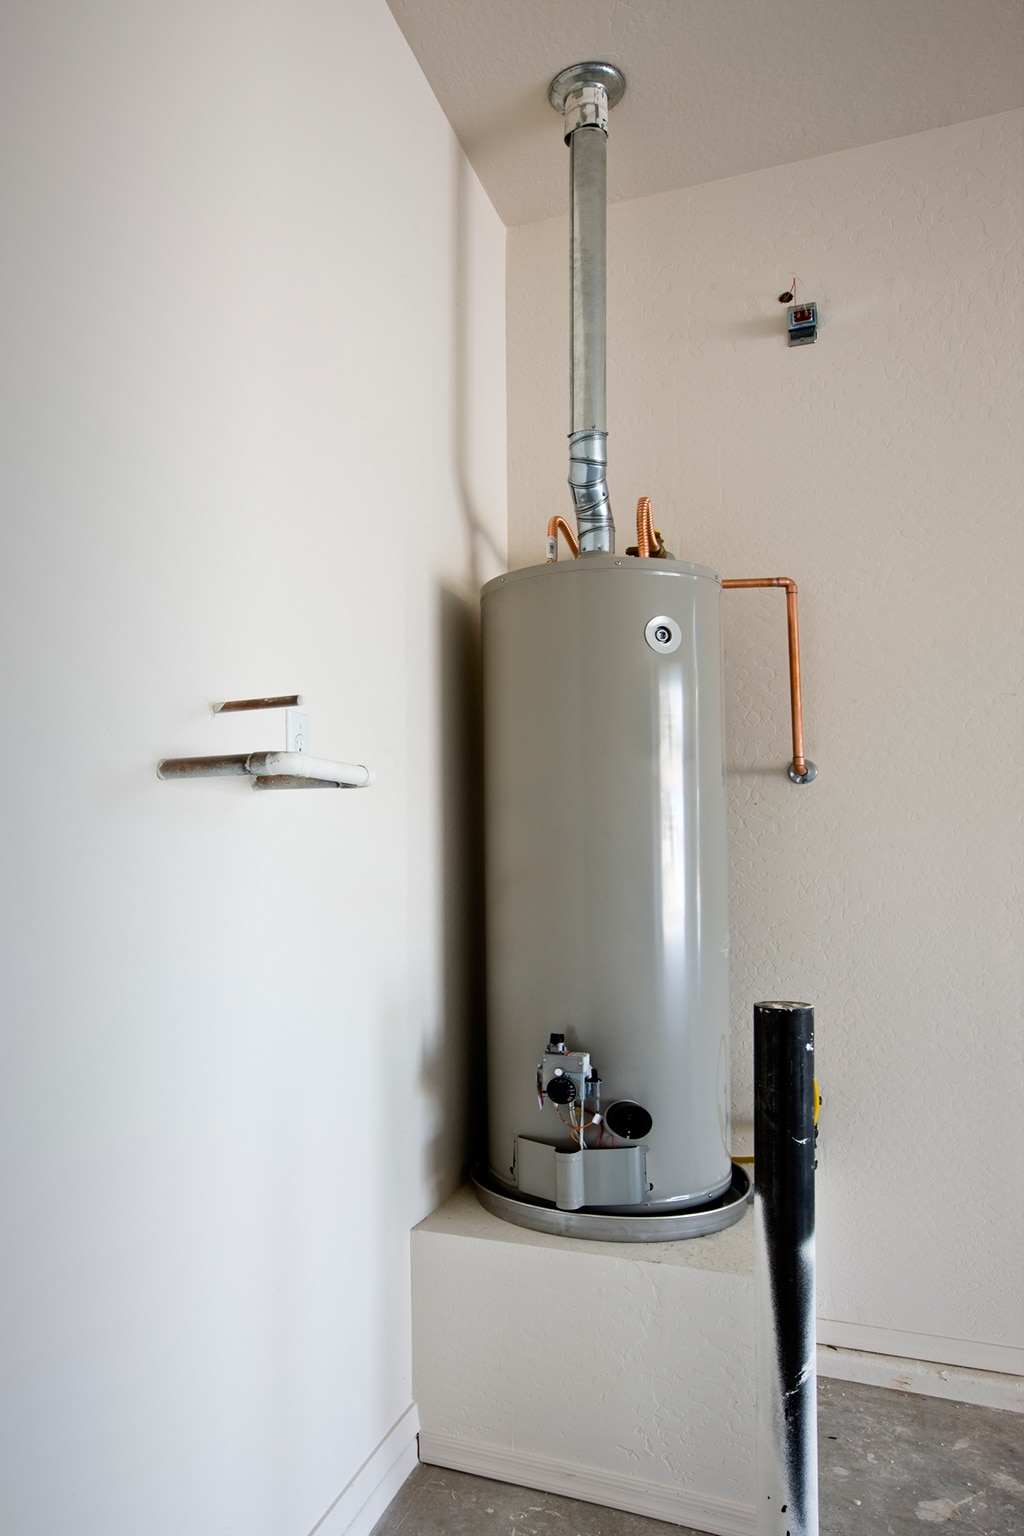 Water Heater Repair: What Kind Of Water Heater Should You Own? ﻿| Conway, SC